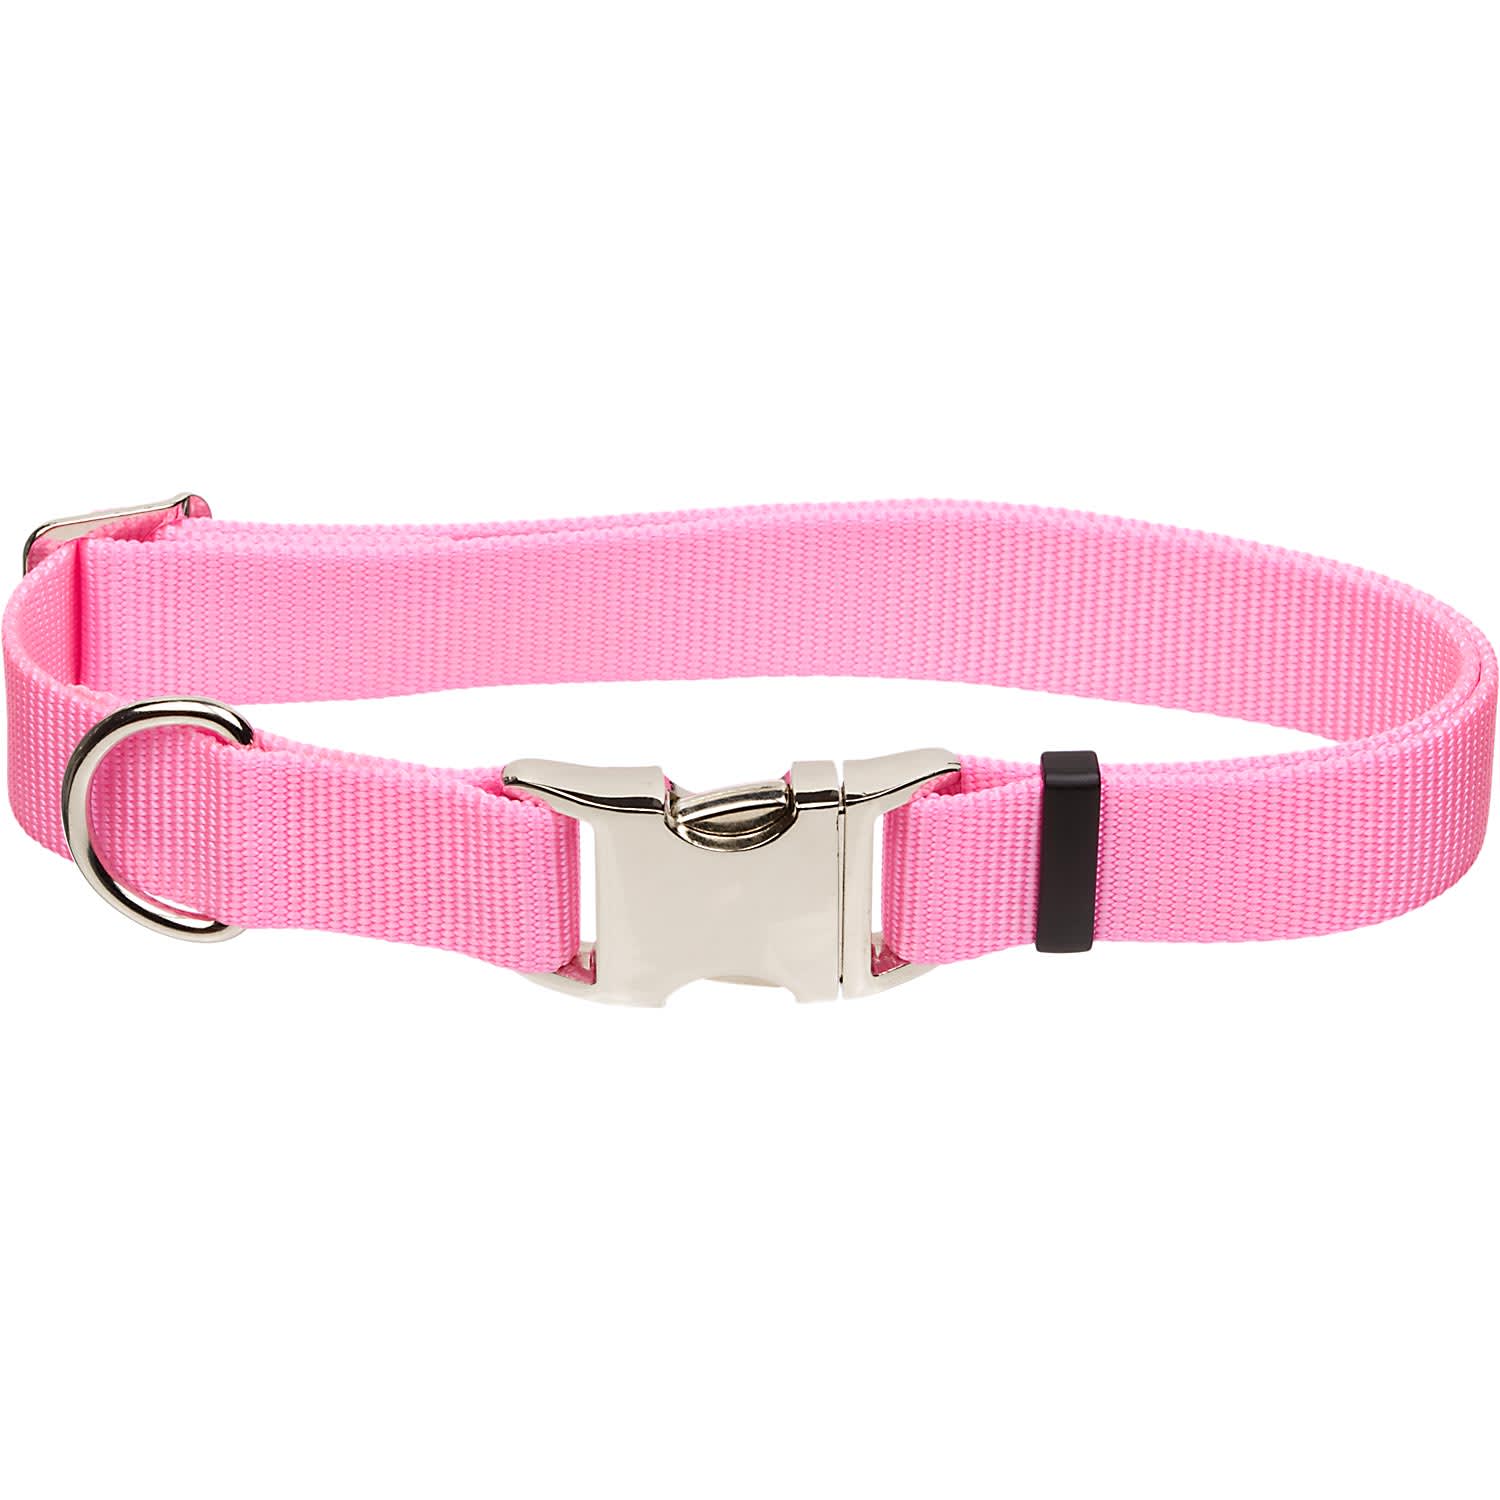 Coastal Pet Products Personalized Pink Bright Adjustable Dog Collar with Metal Buckle